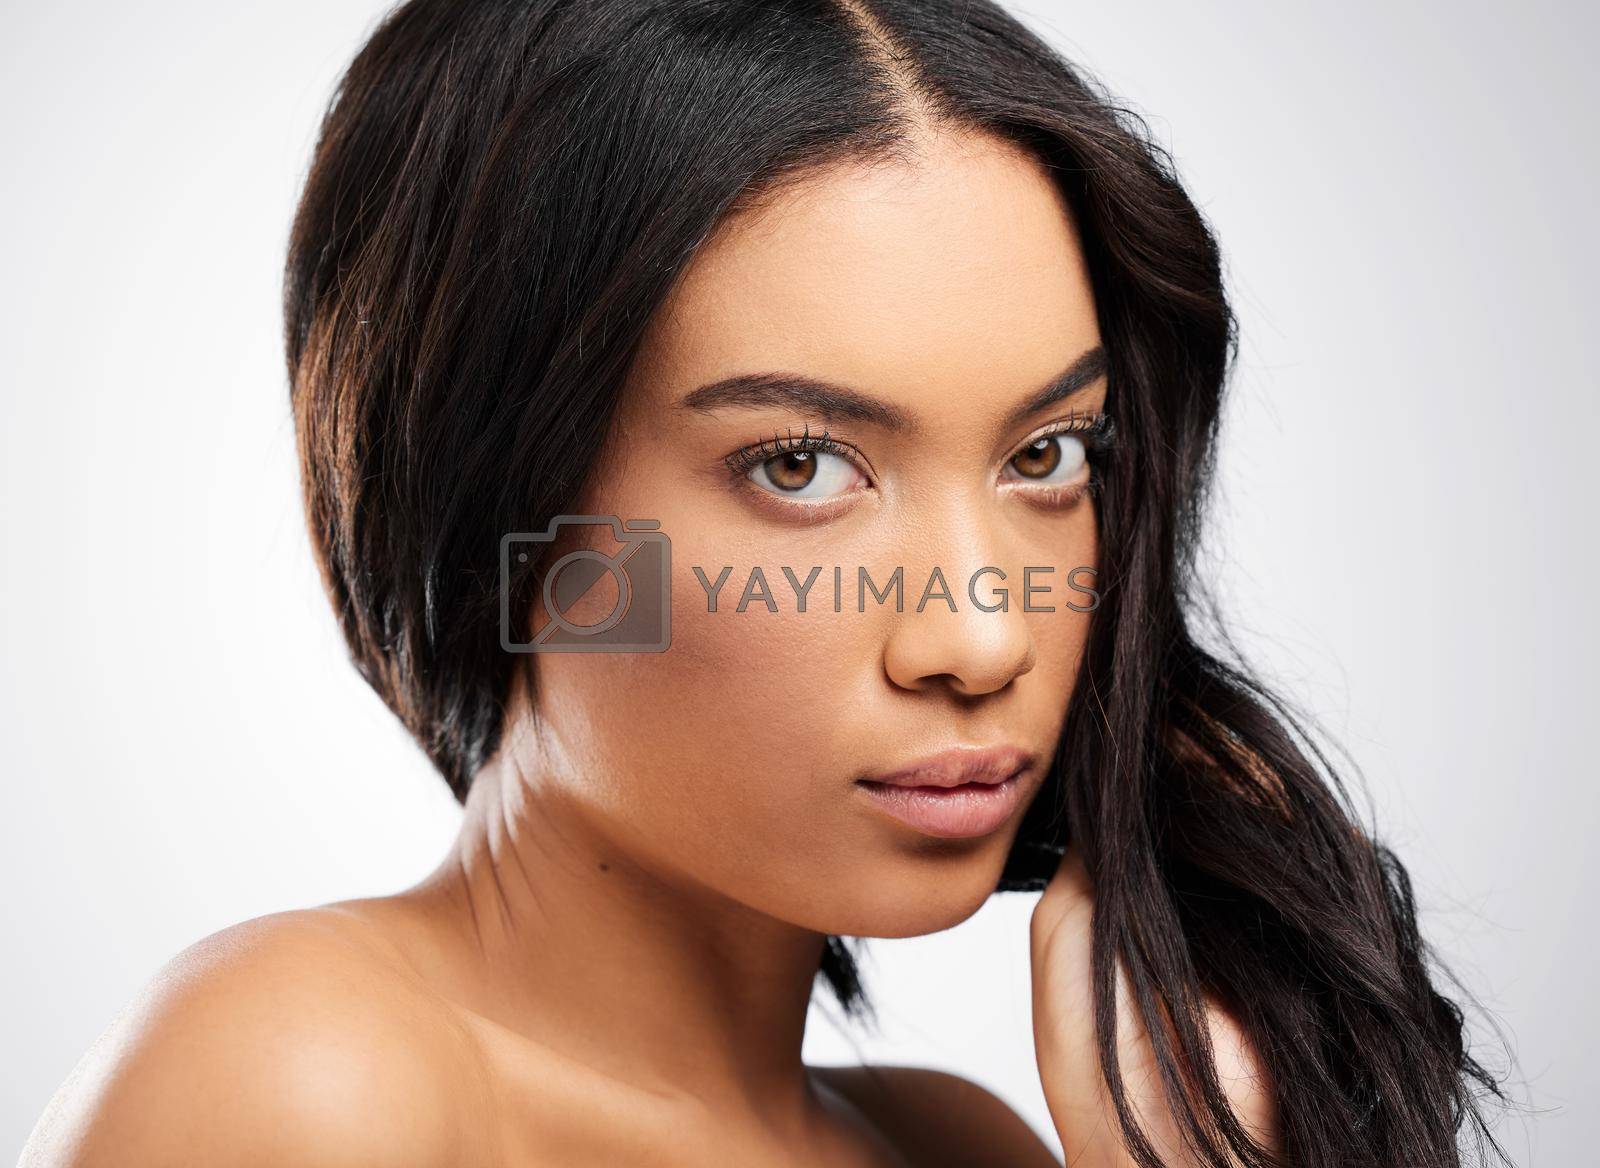 Royalty free image of Youve gotta take your haircare seriously. Cropped portrait of an attractive young woman posing in studio against a grey background. by YuriArcurs